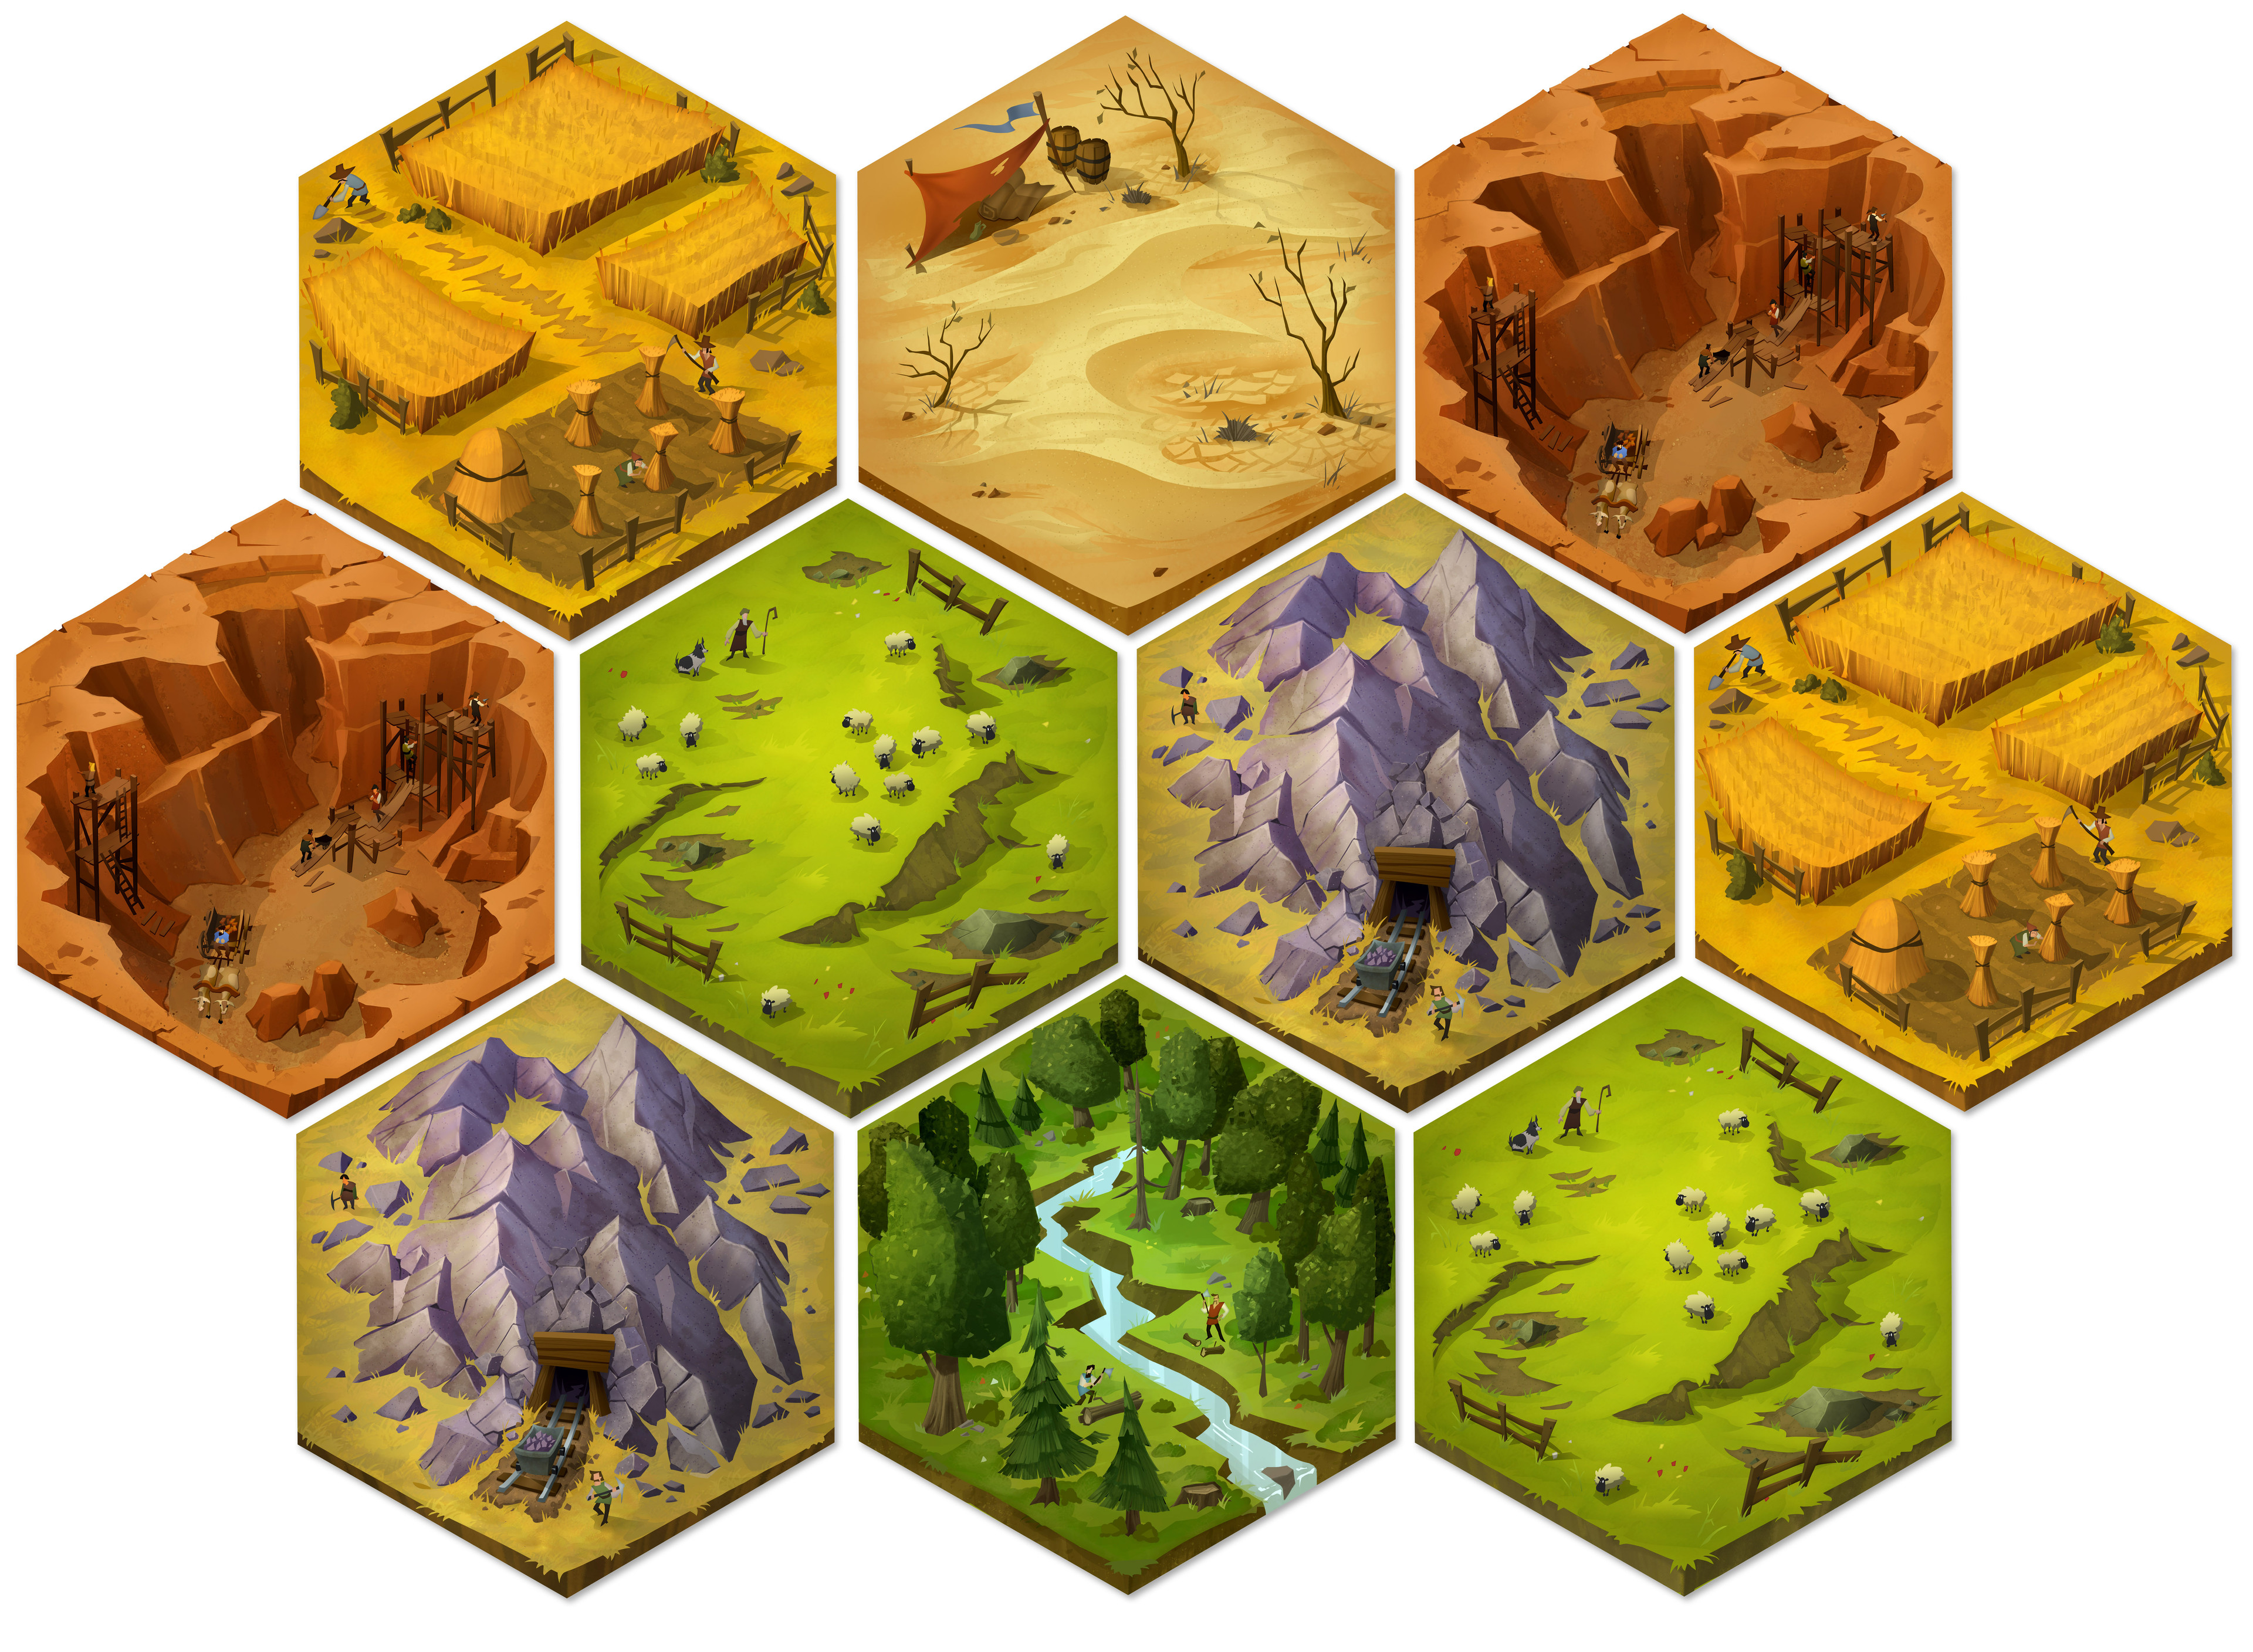 Here are the Resource Hexes. I wanted to give them as much dimension as I could.